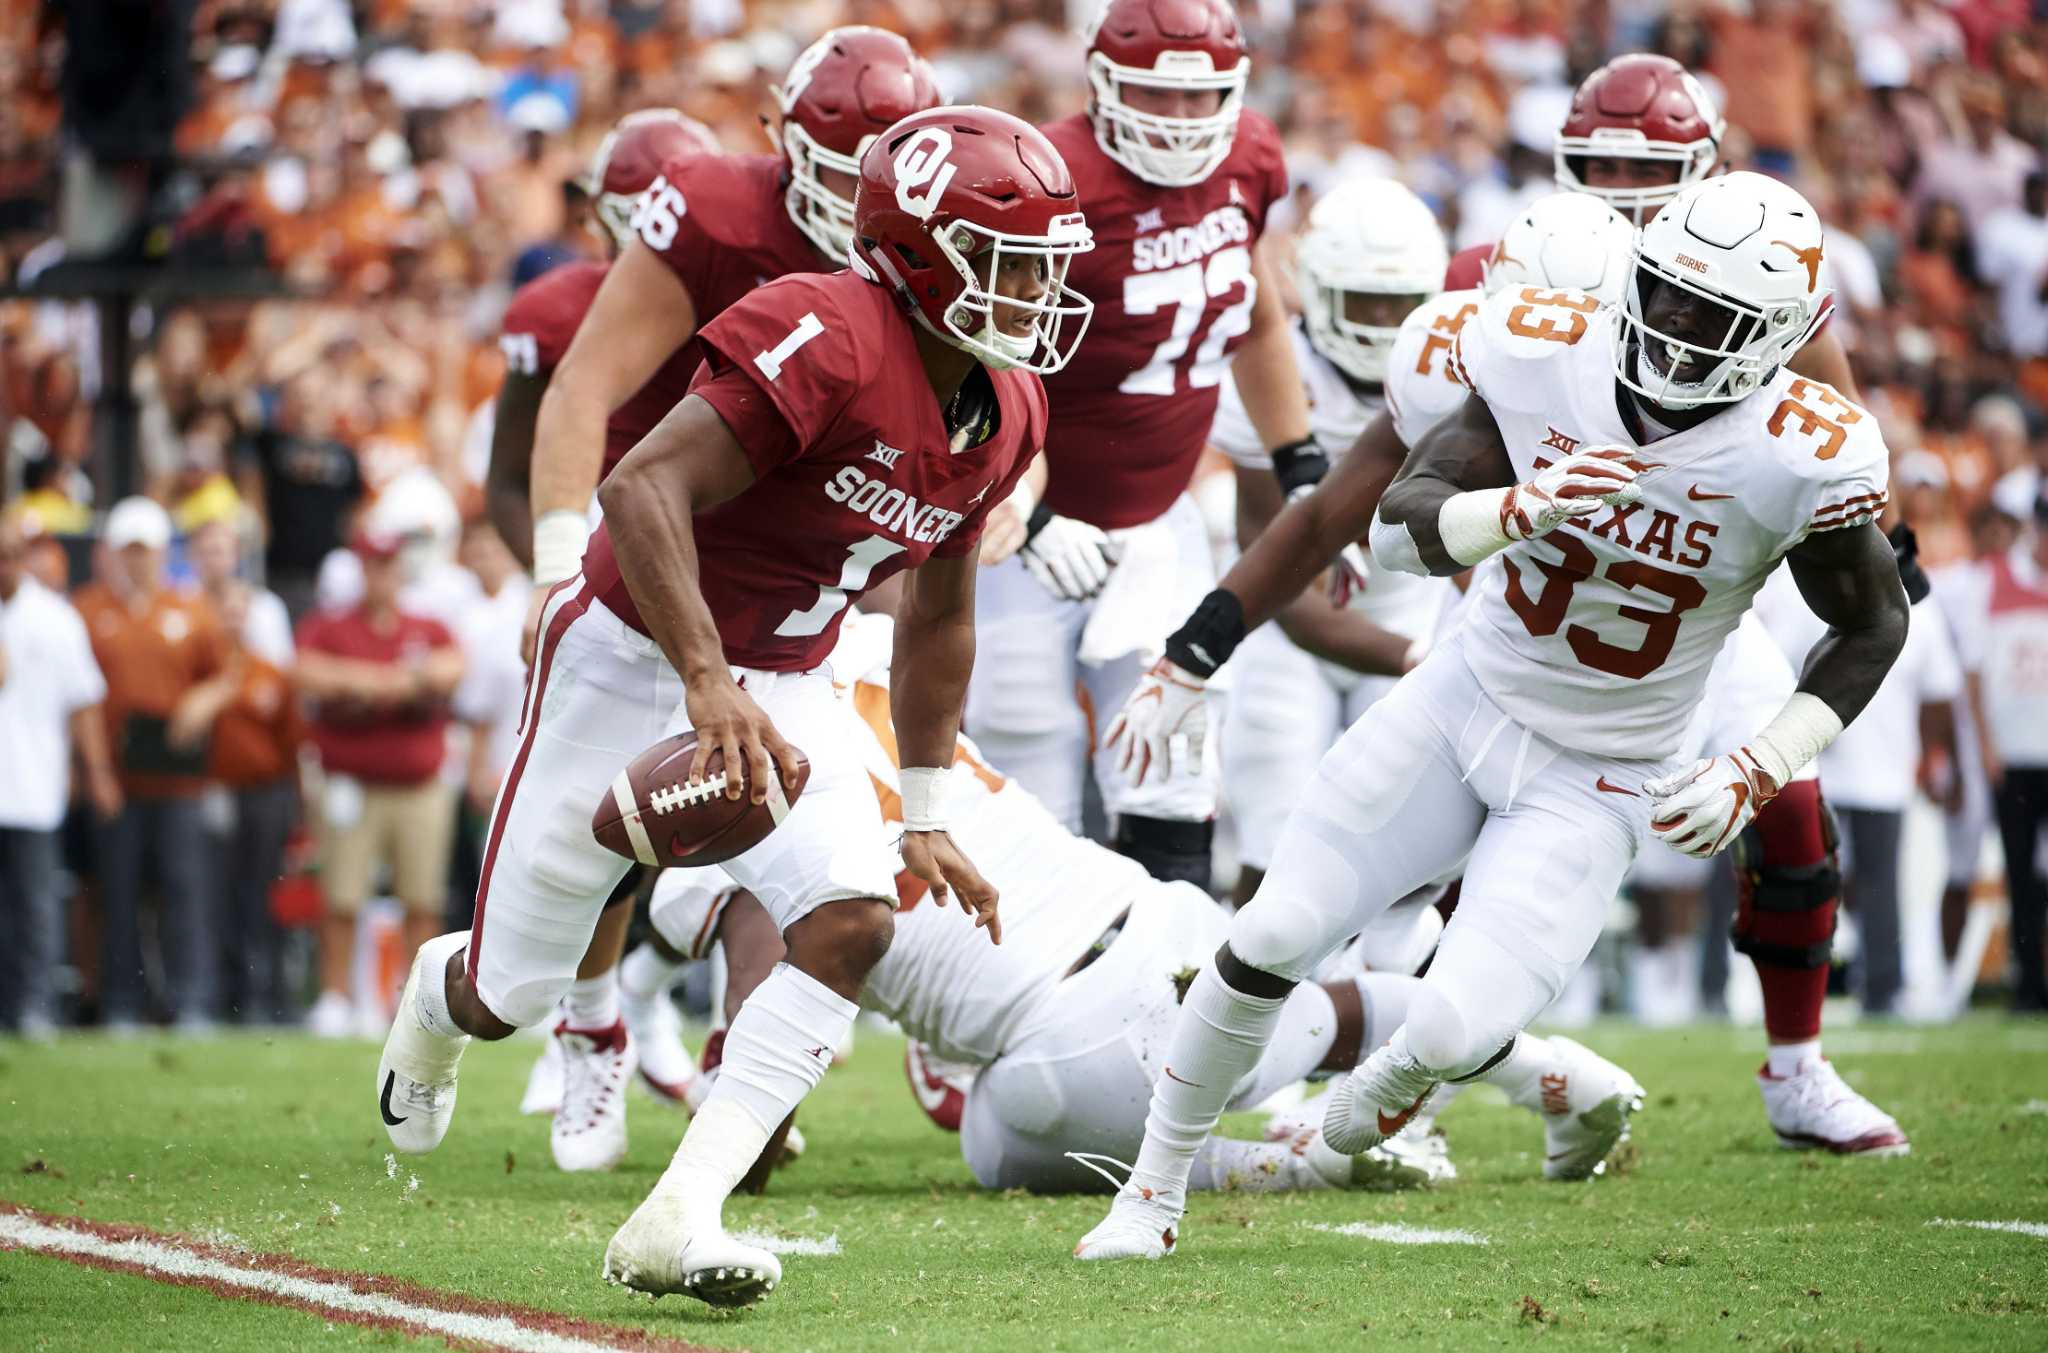 Longhorns brace for round 2 with Sooners' prolific offense